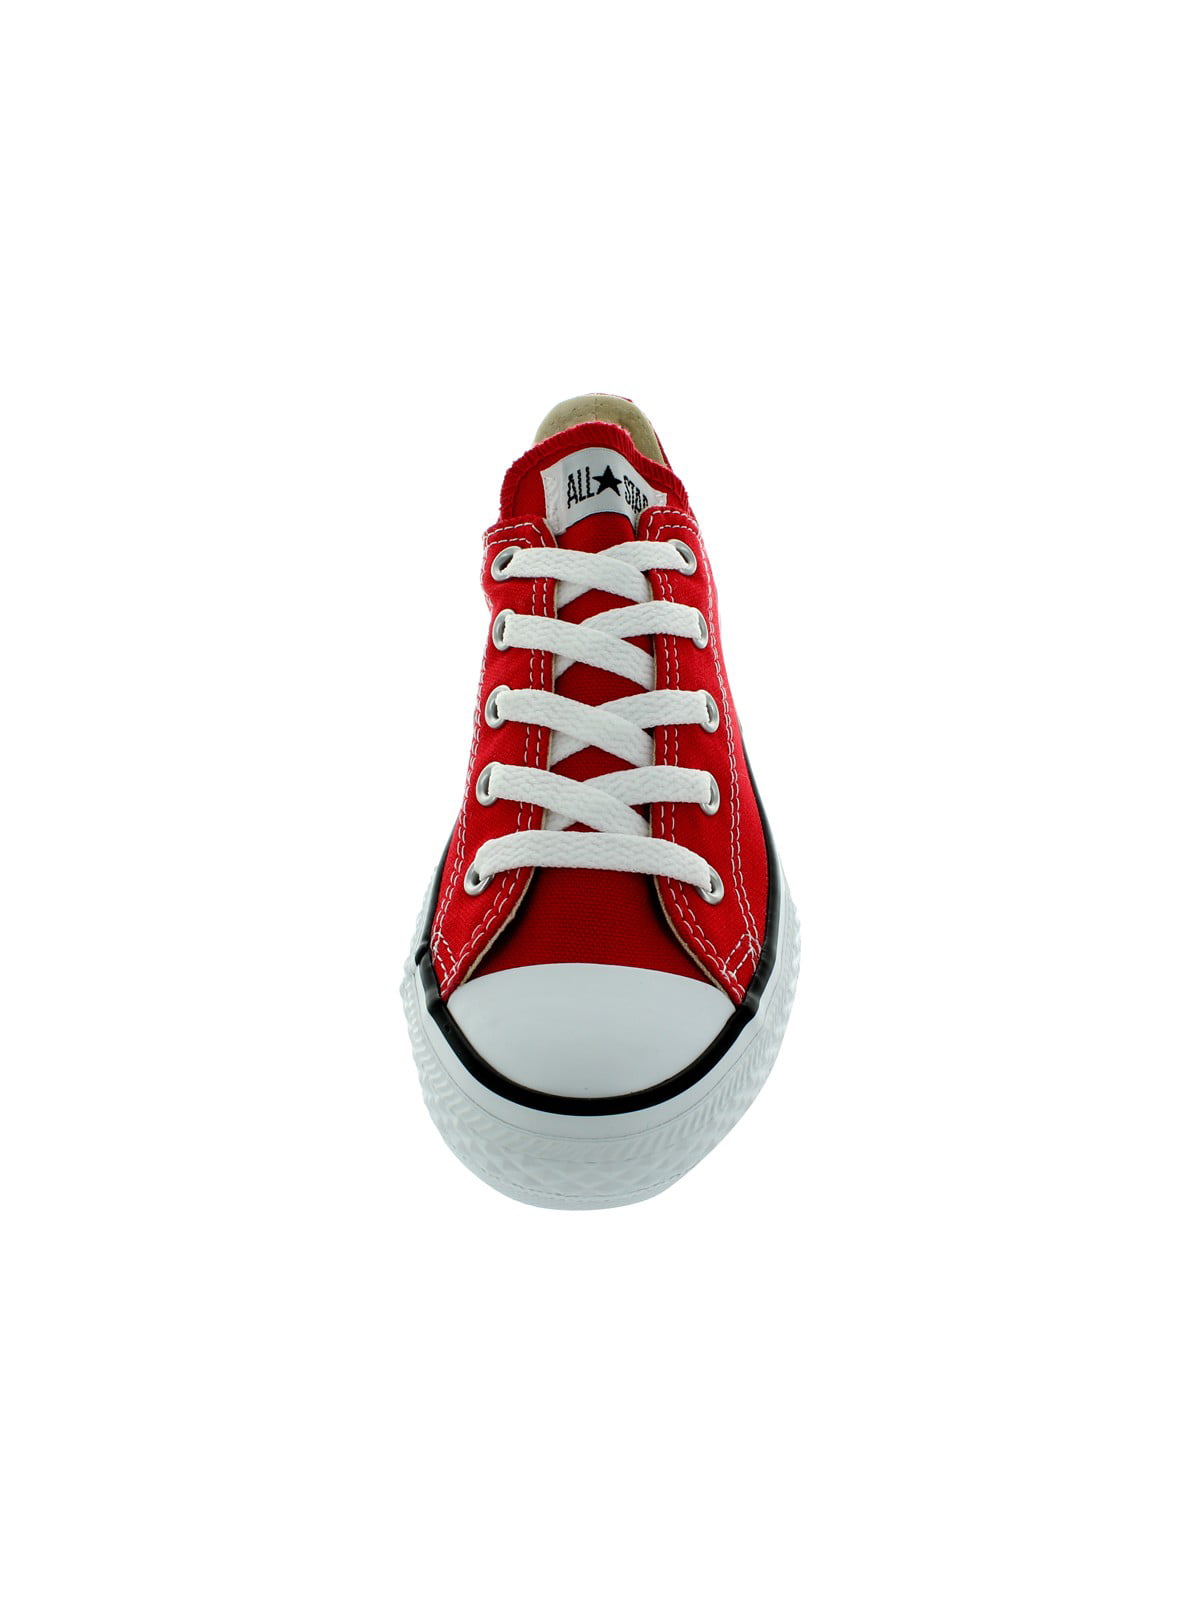 converse youth basketball shoes